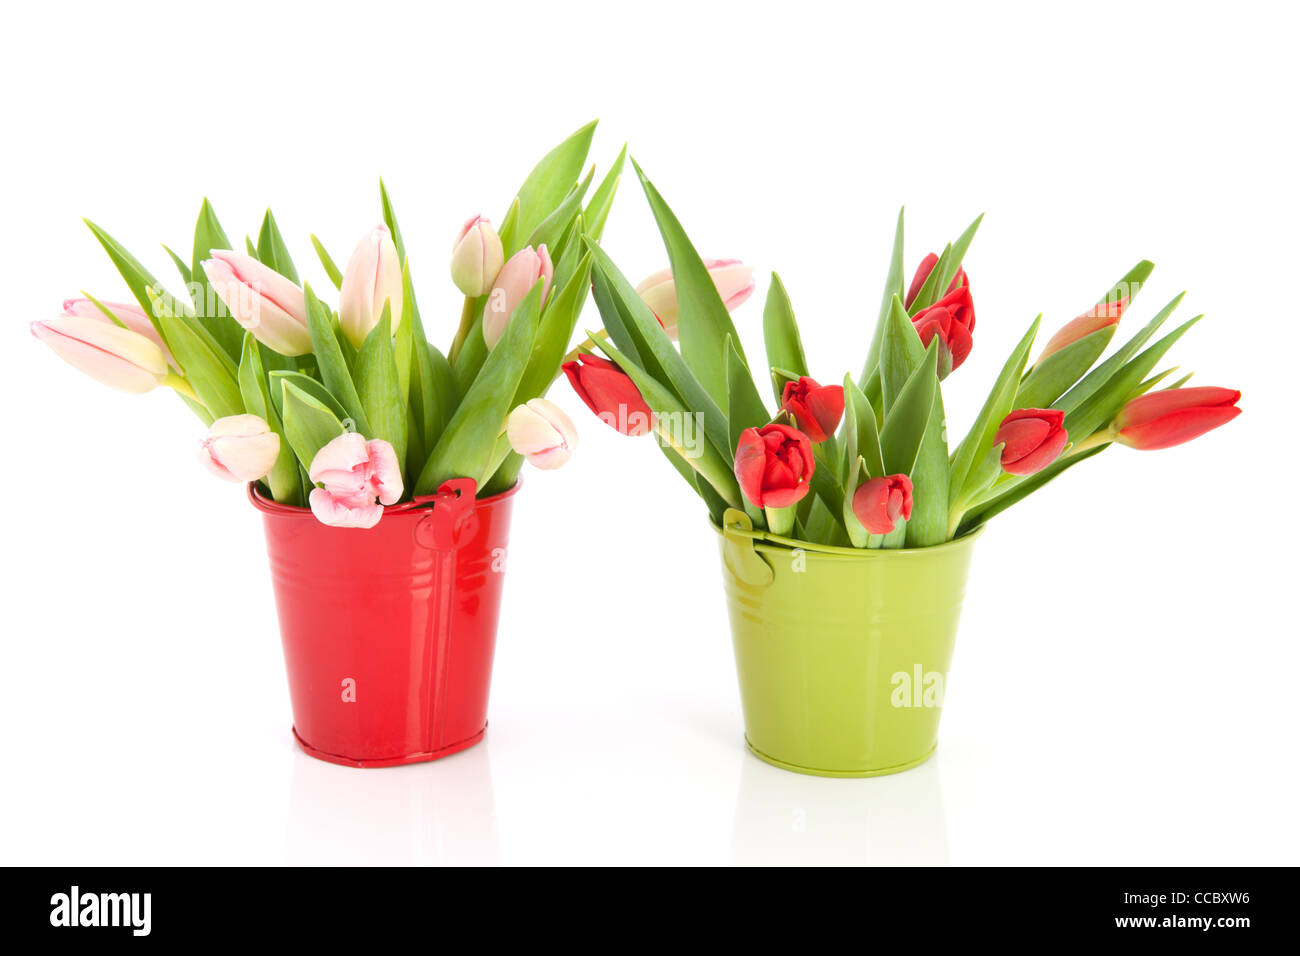 red and green buckets with bouquet tulips CCBXW6